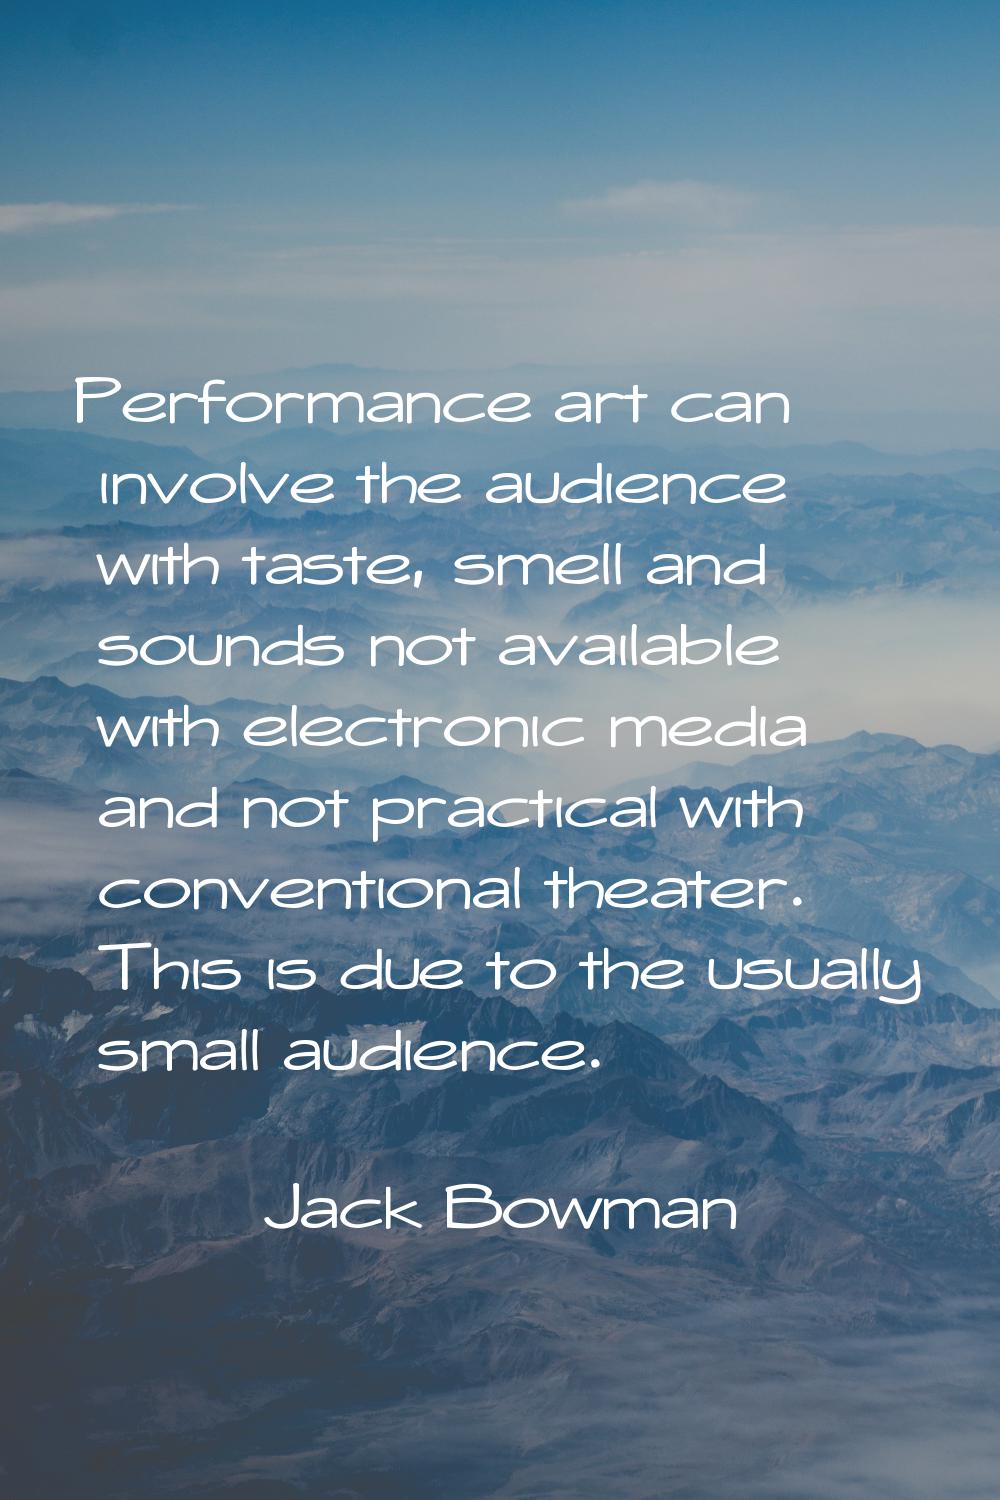 Performance art can involve the audience with taste, smell and sounds not available with electronic